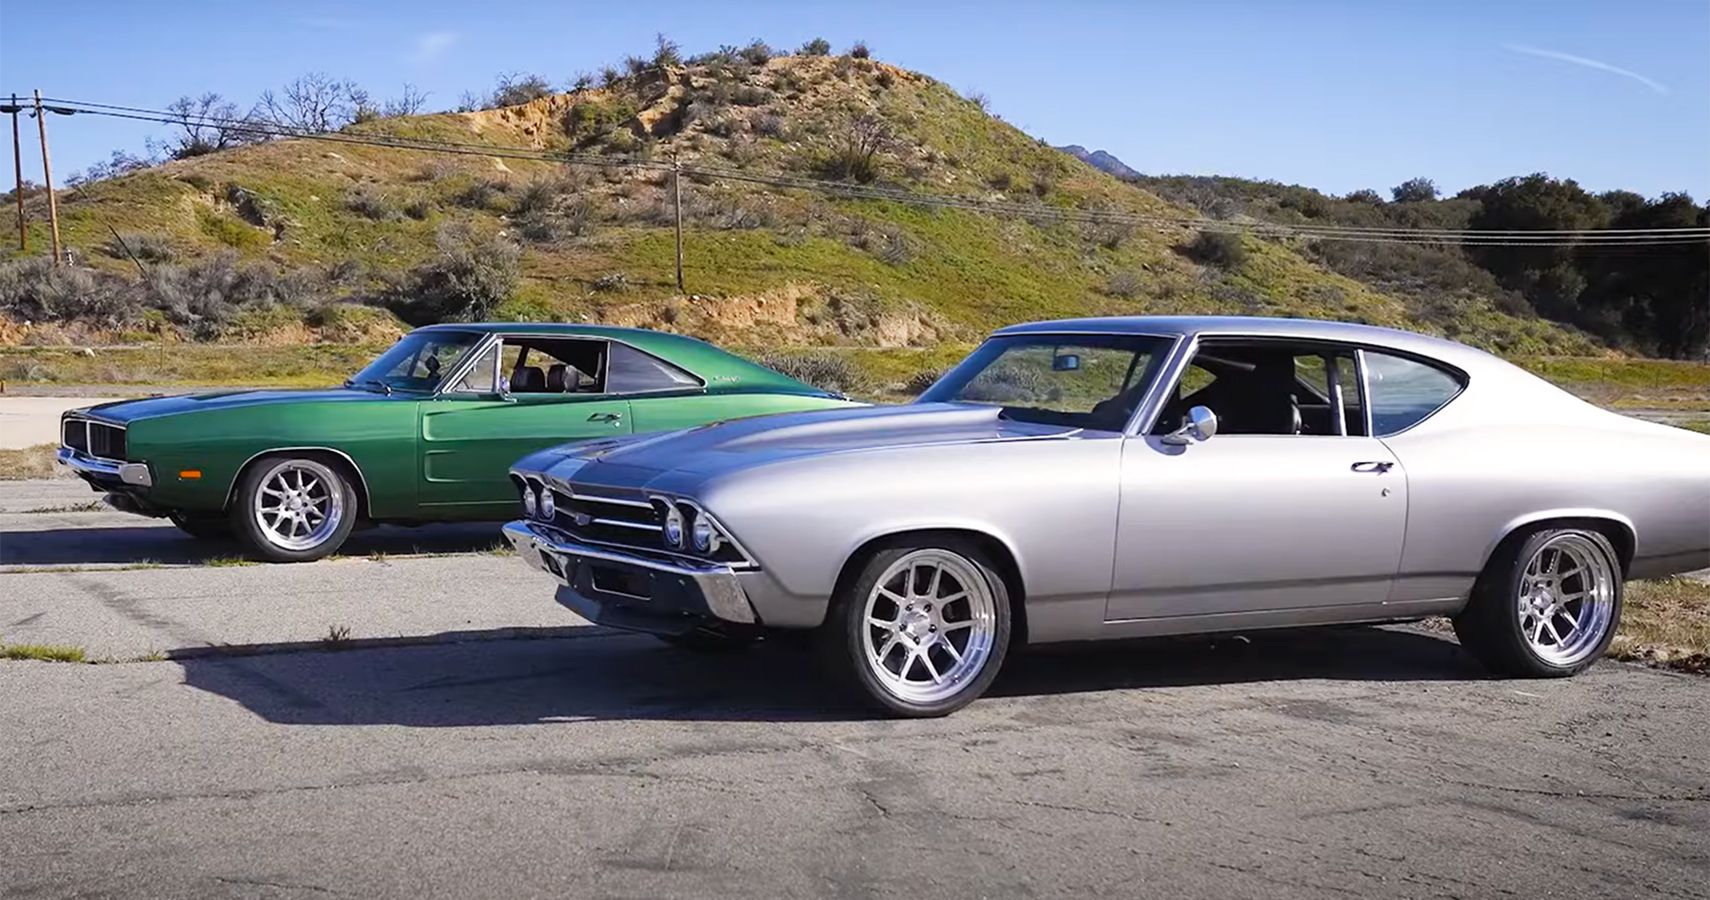 Silver Chevy muscle car and green Dodge classic car